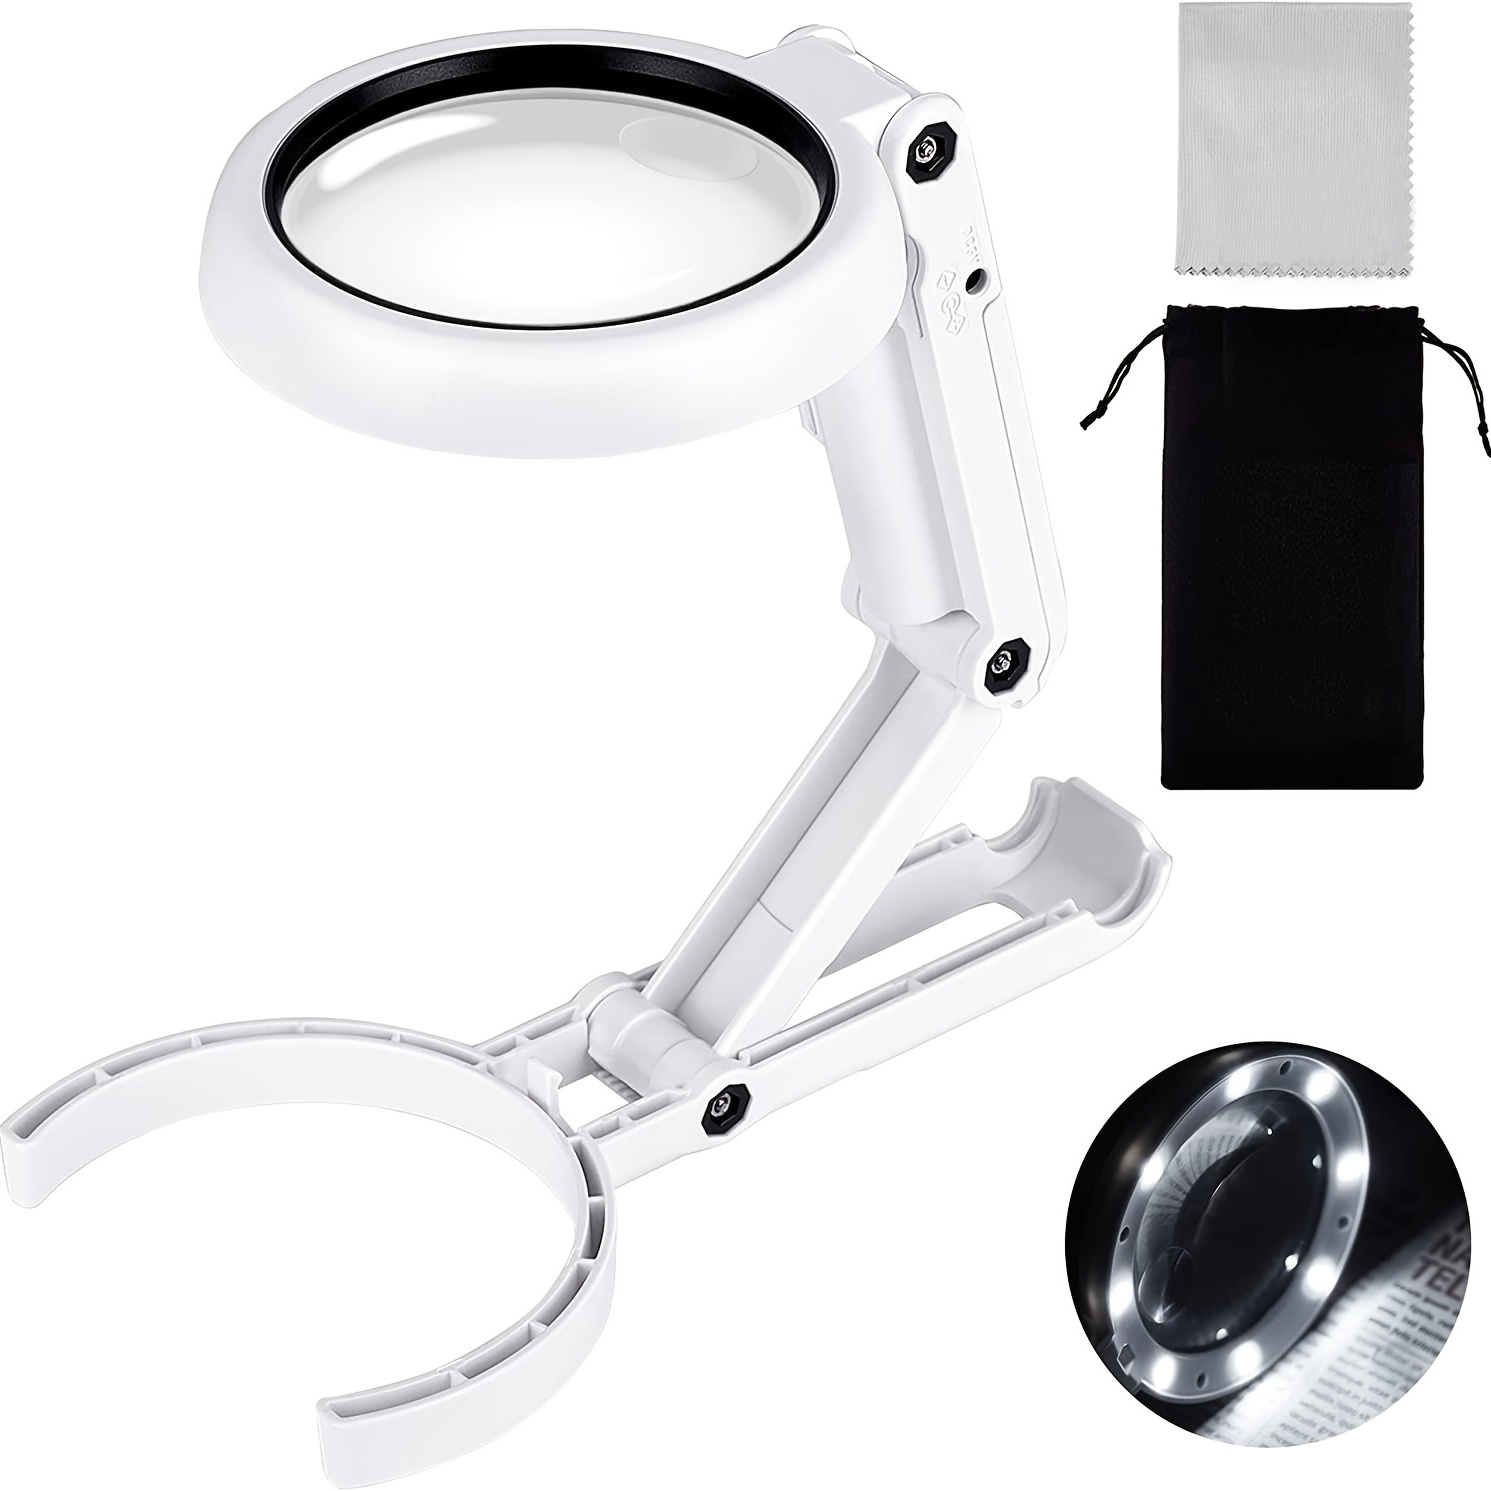 Magnifying goggles, 1x to 3.5x power. Sold individually. - Design aids -  Tools, gadgets - OTHER ITEMS 